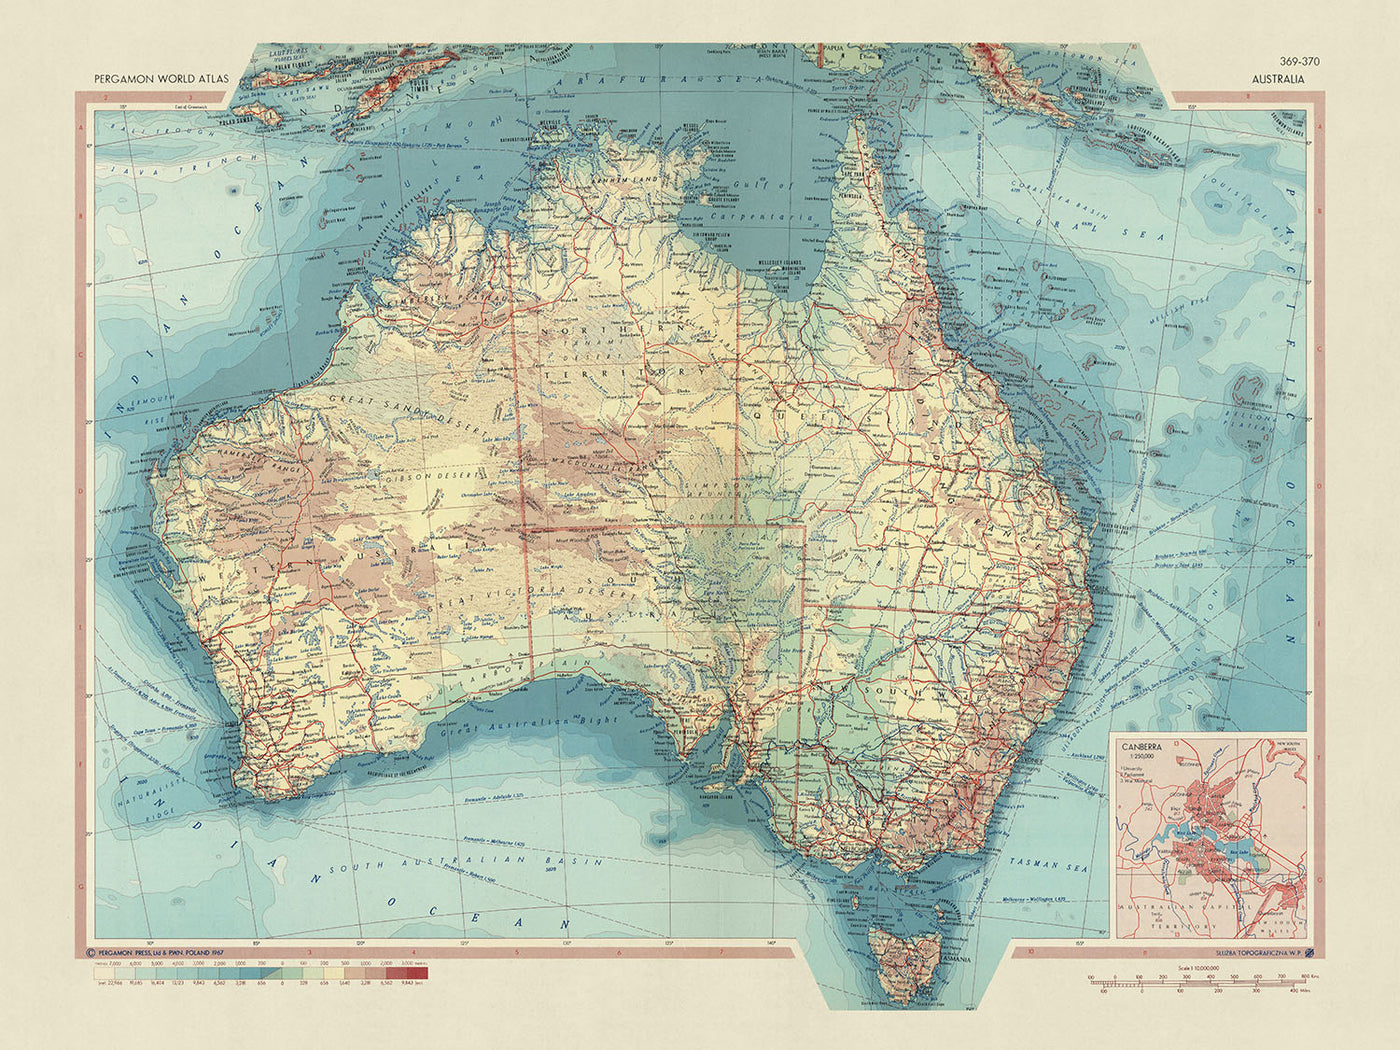 Old Map of Australia, 1967: Political & Physical Atlas Chart of States & Territories